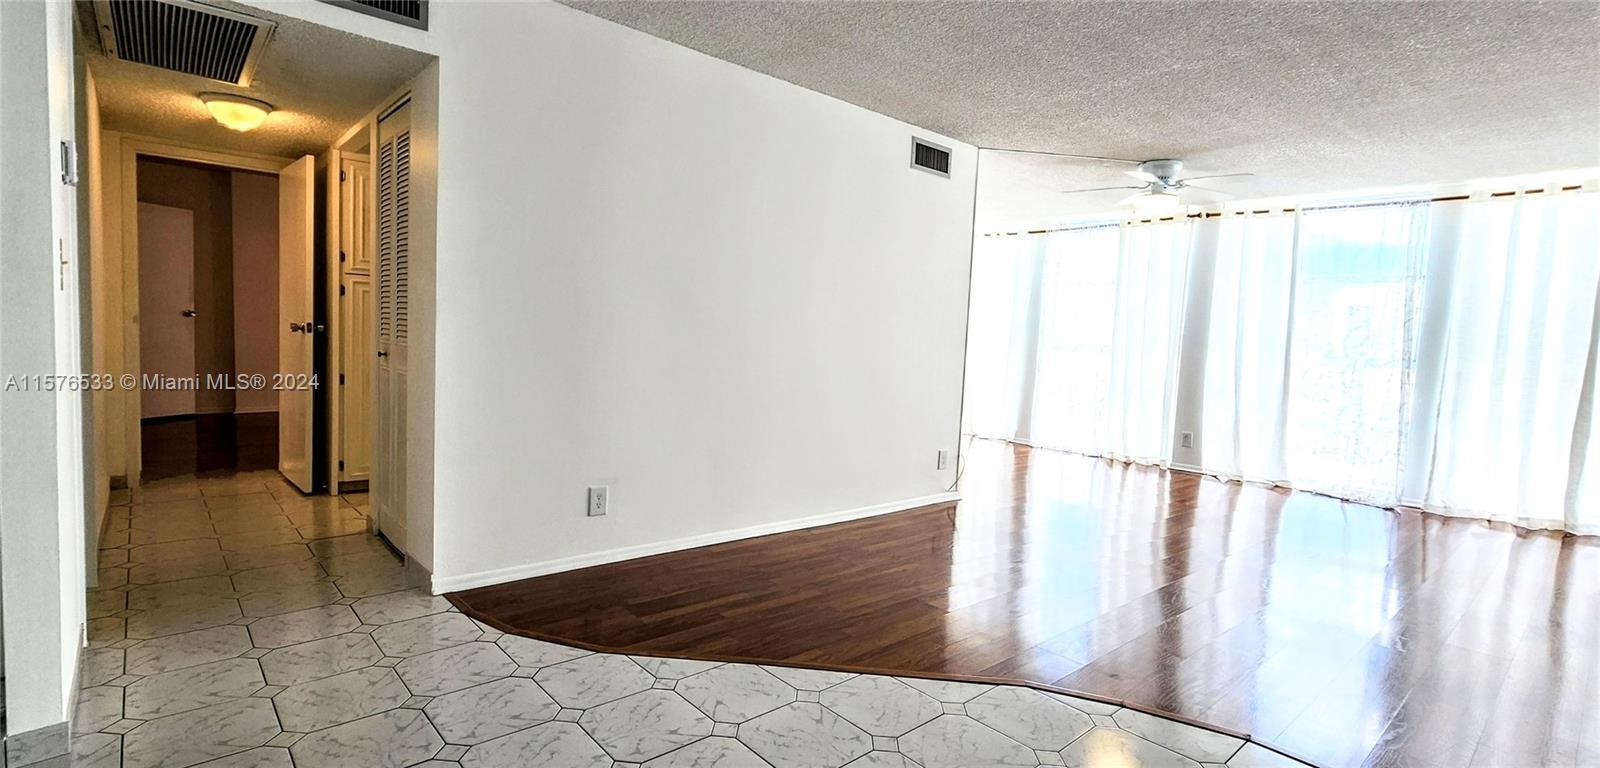 Welcome to your South Florida sanctuary nestled in vibrant Hallandale Beach! This charming 2-bed, 1.